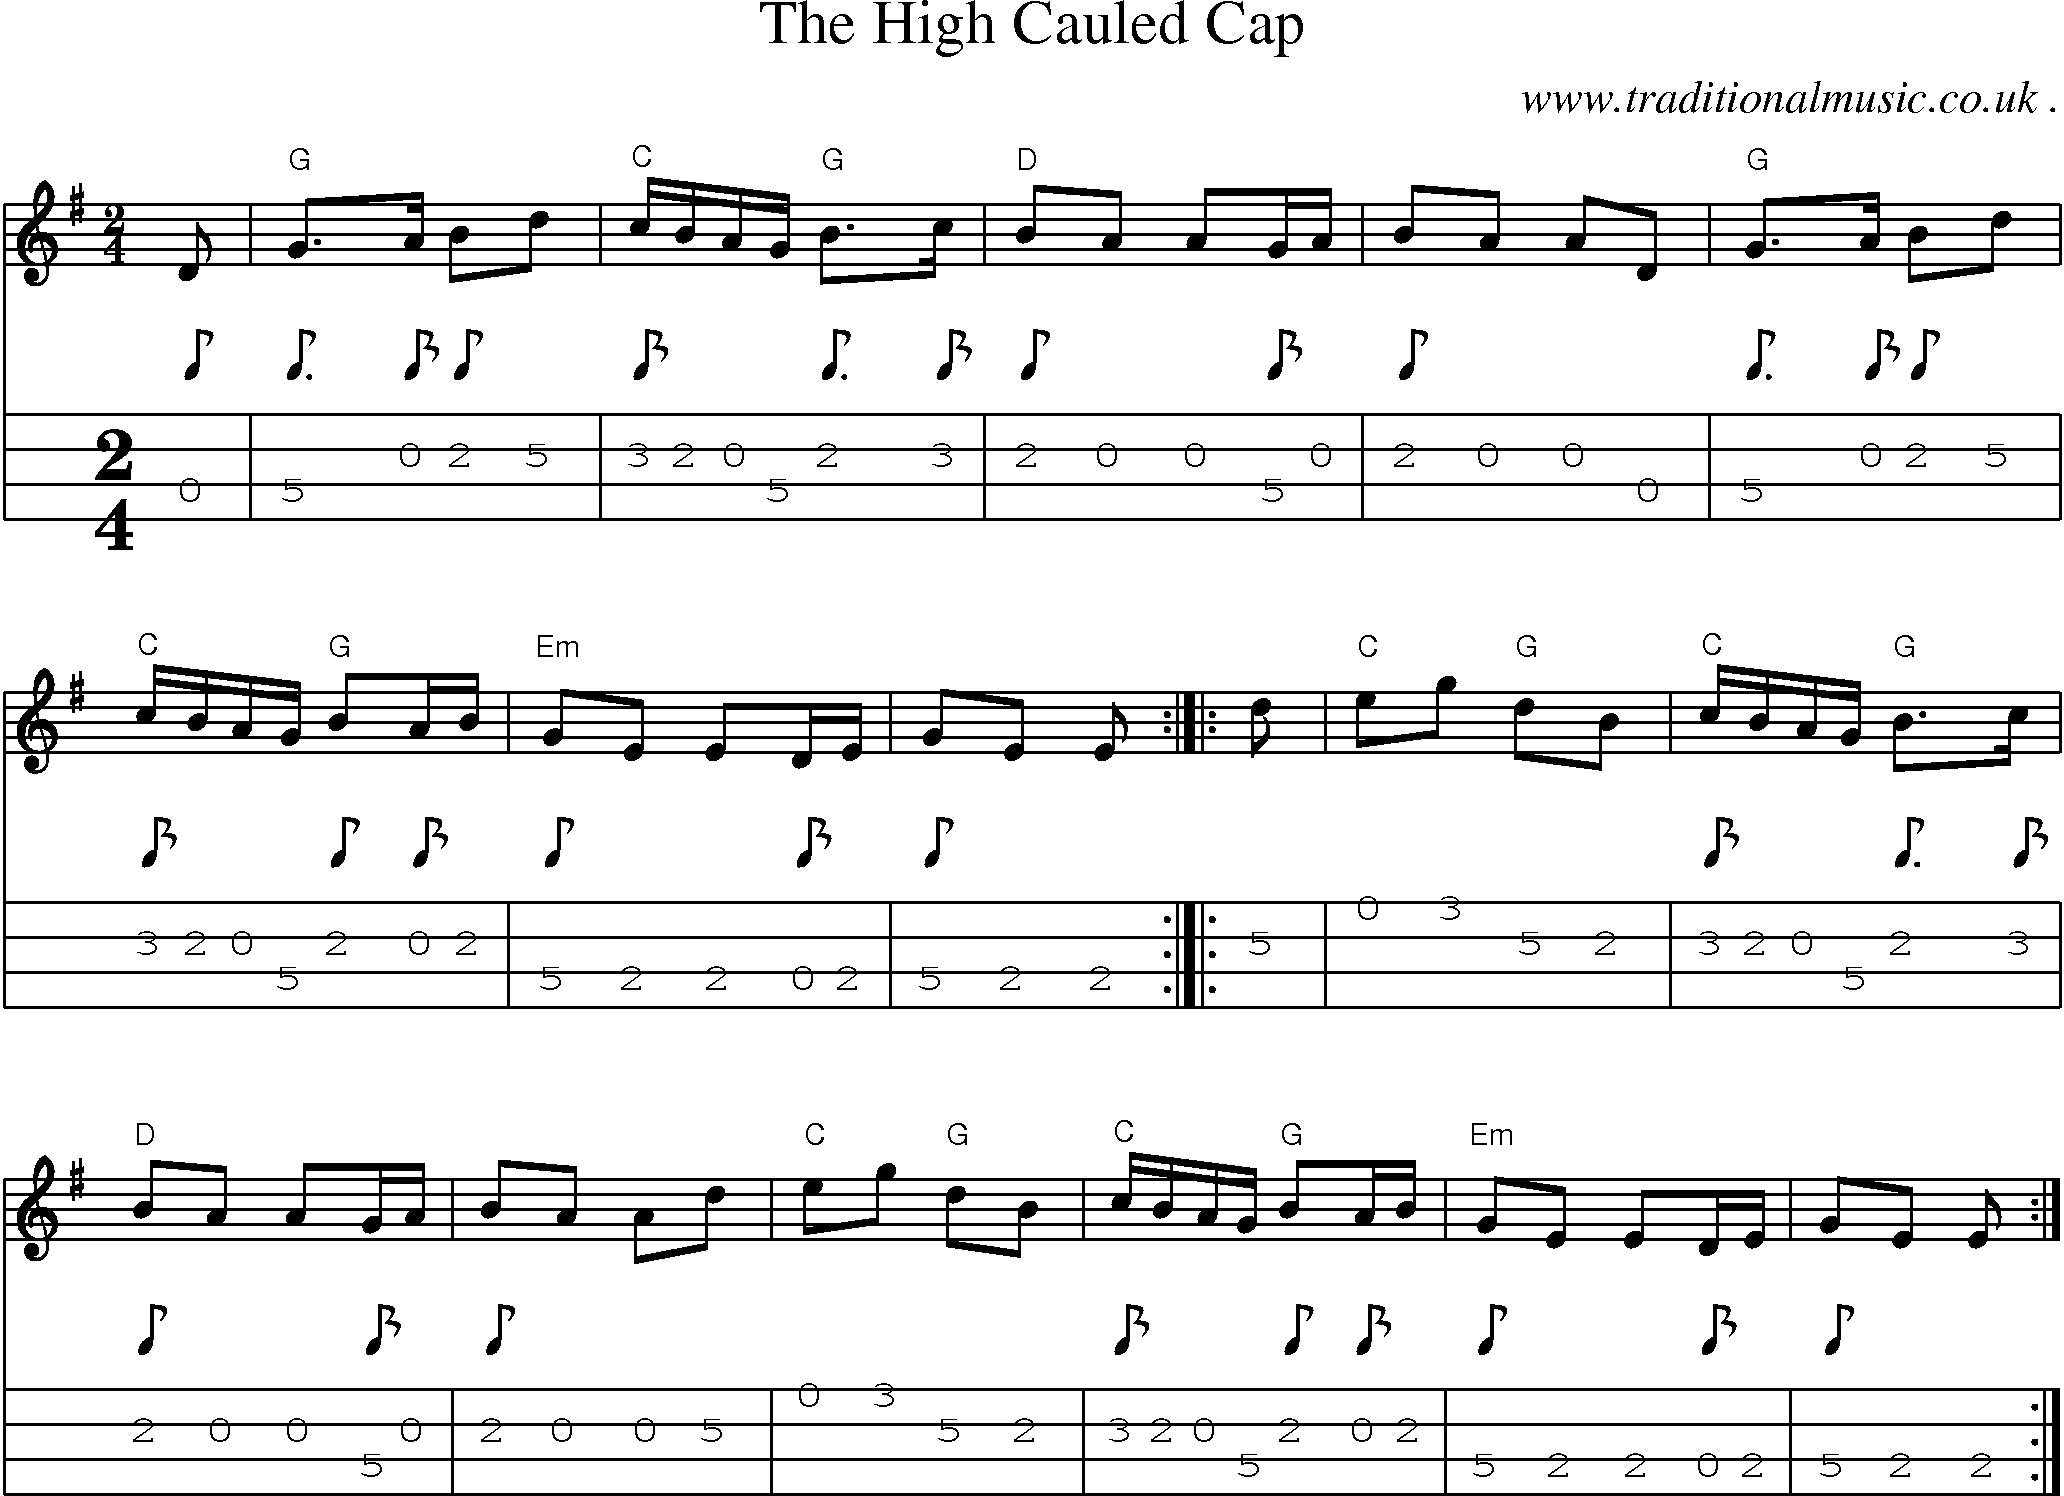 Music Score and Guitar Tabs for The High Cauled Cap